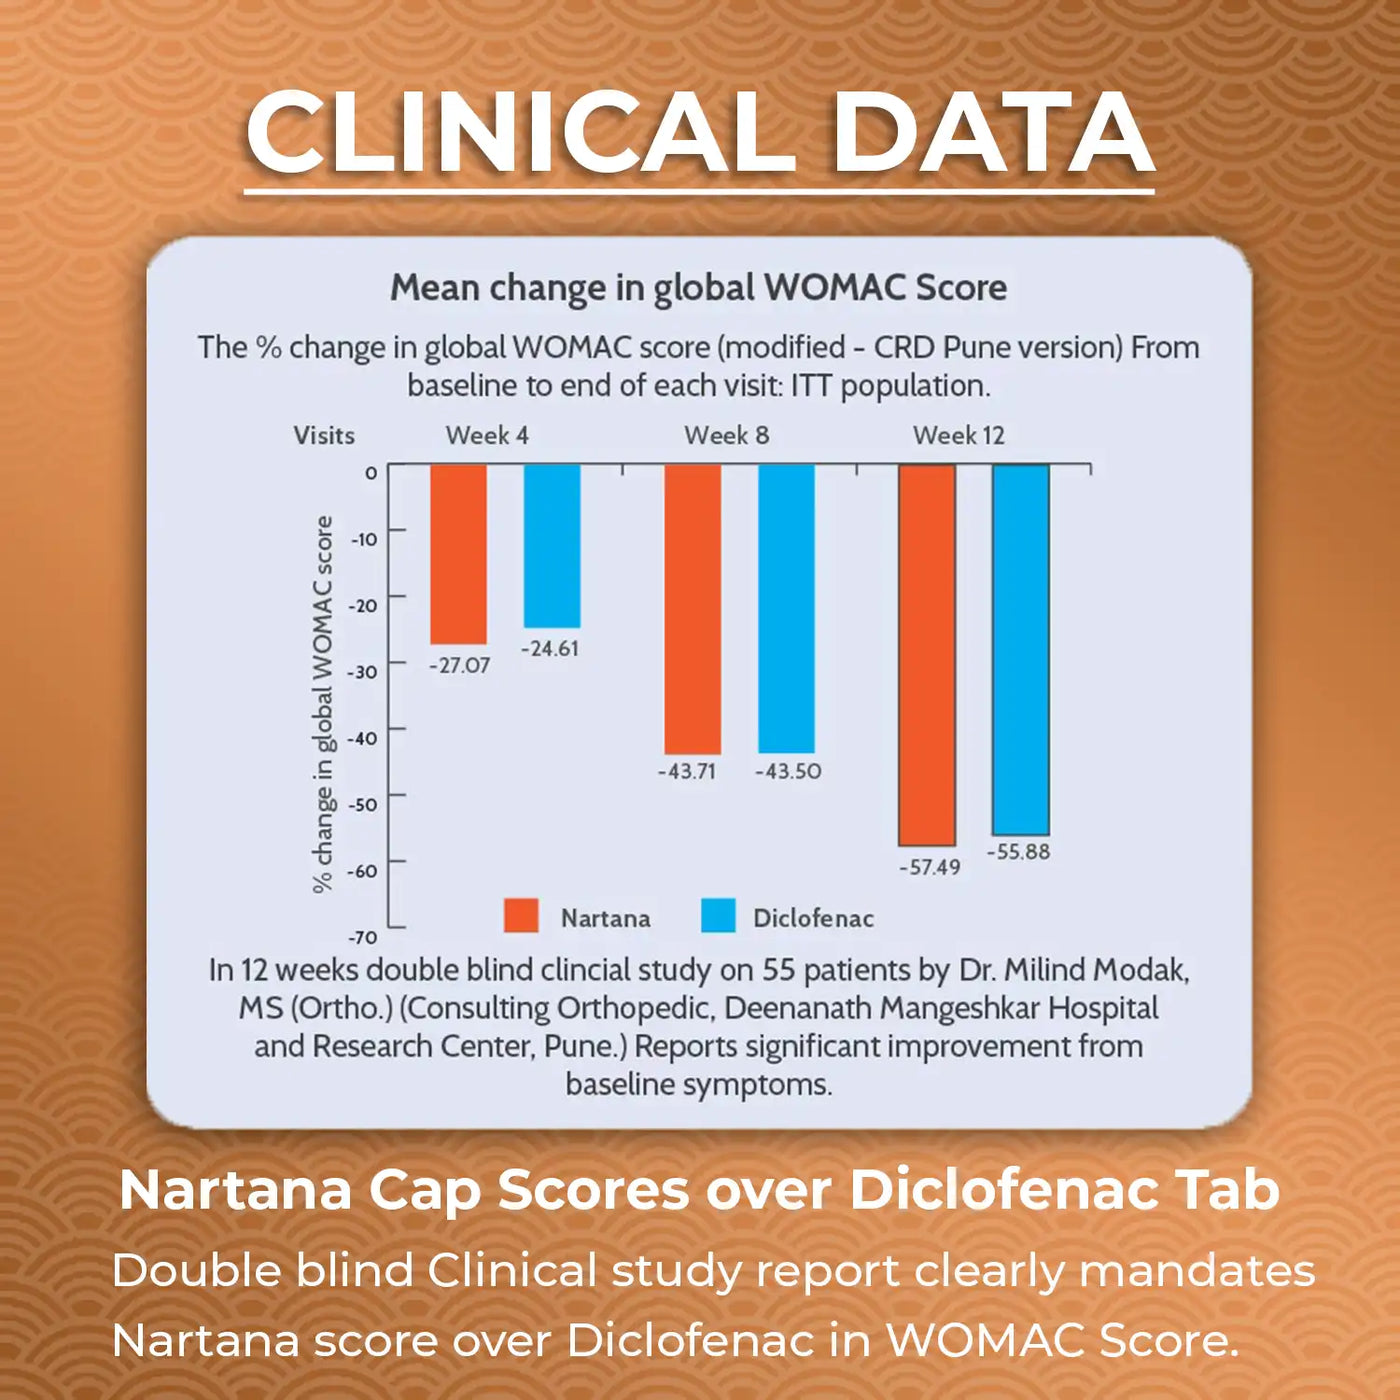 clinical study that shows nartana capsule works better than diclofnac in pain reduction in longterm. 